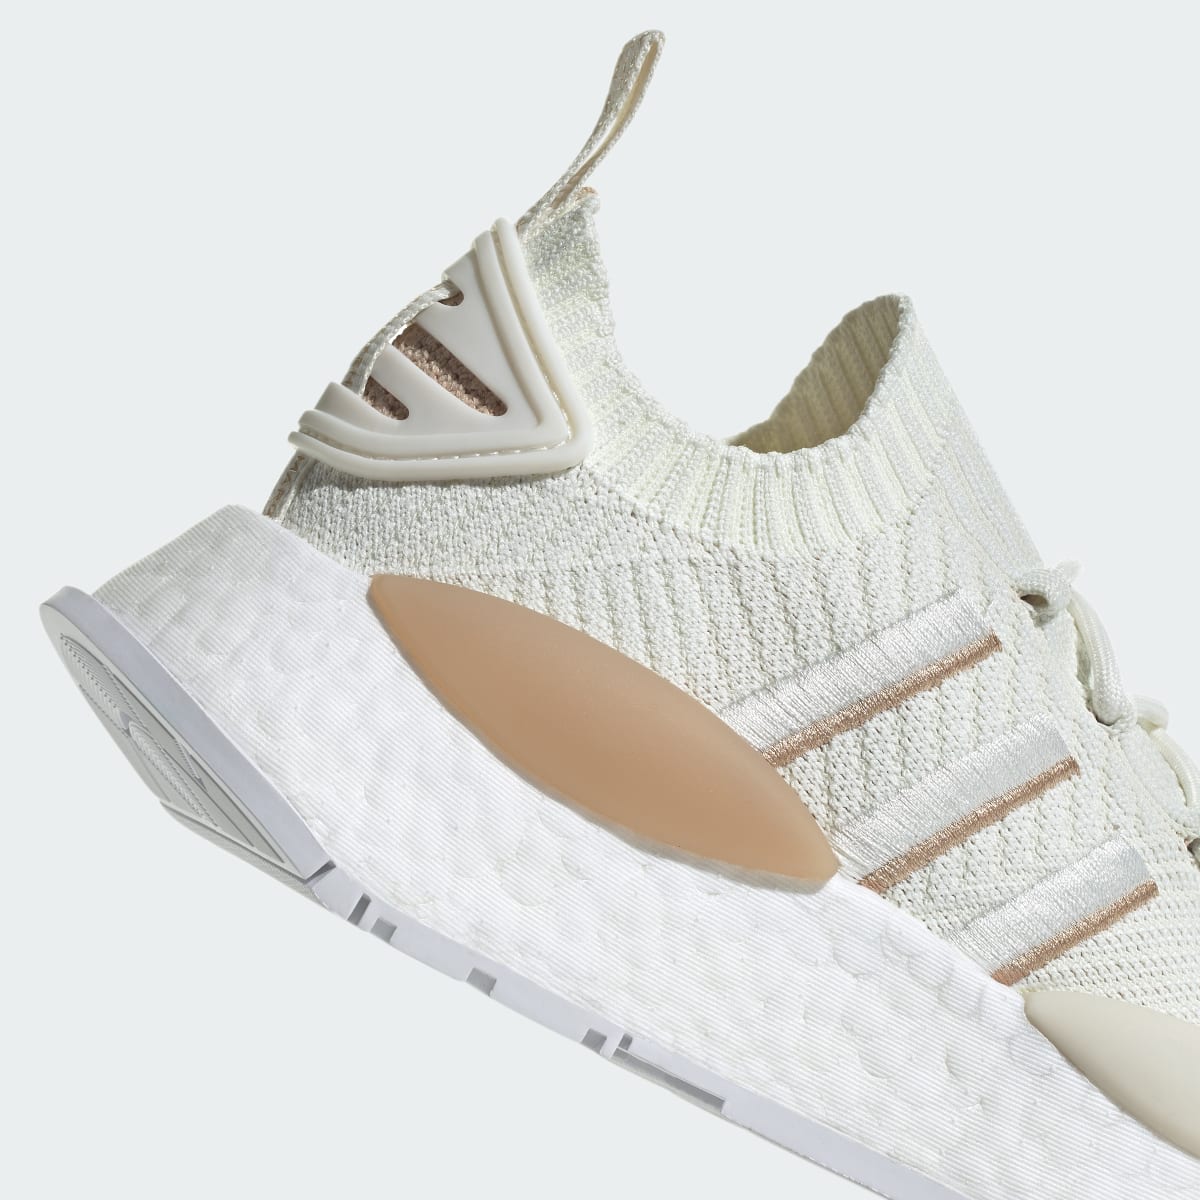 Adidas NMD_W1 Shoes. 10